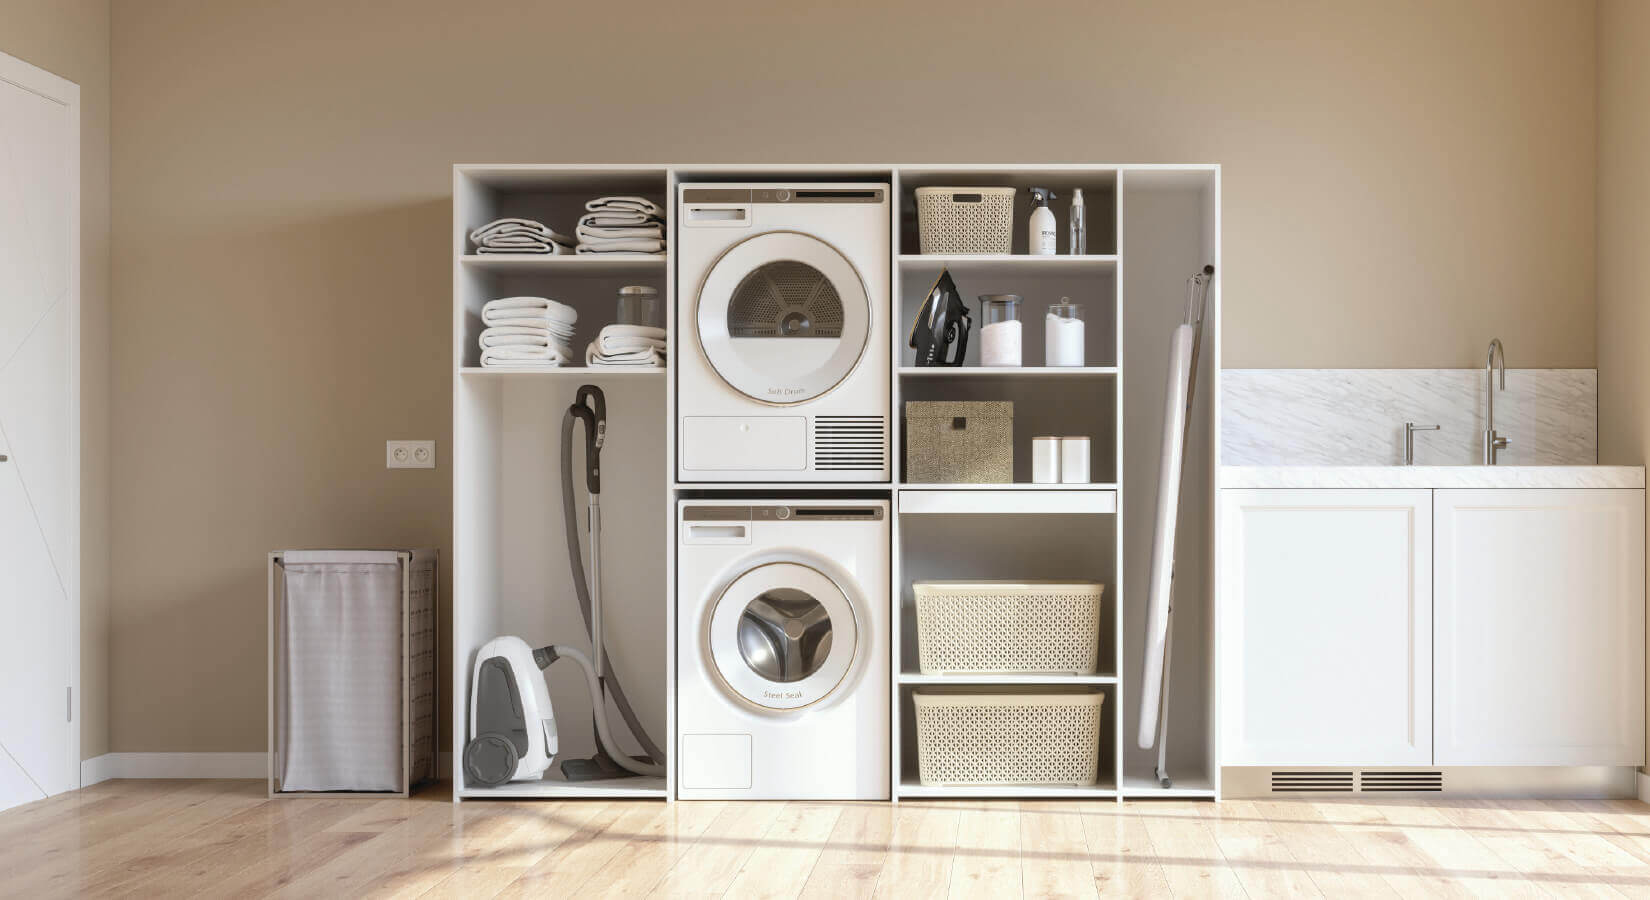 Washer, dryer, vacuum, and linens stacked in open cabinet unit.